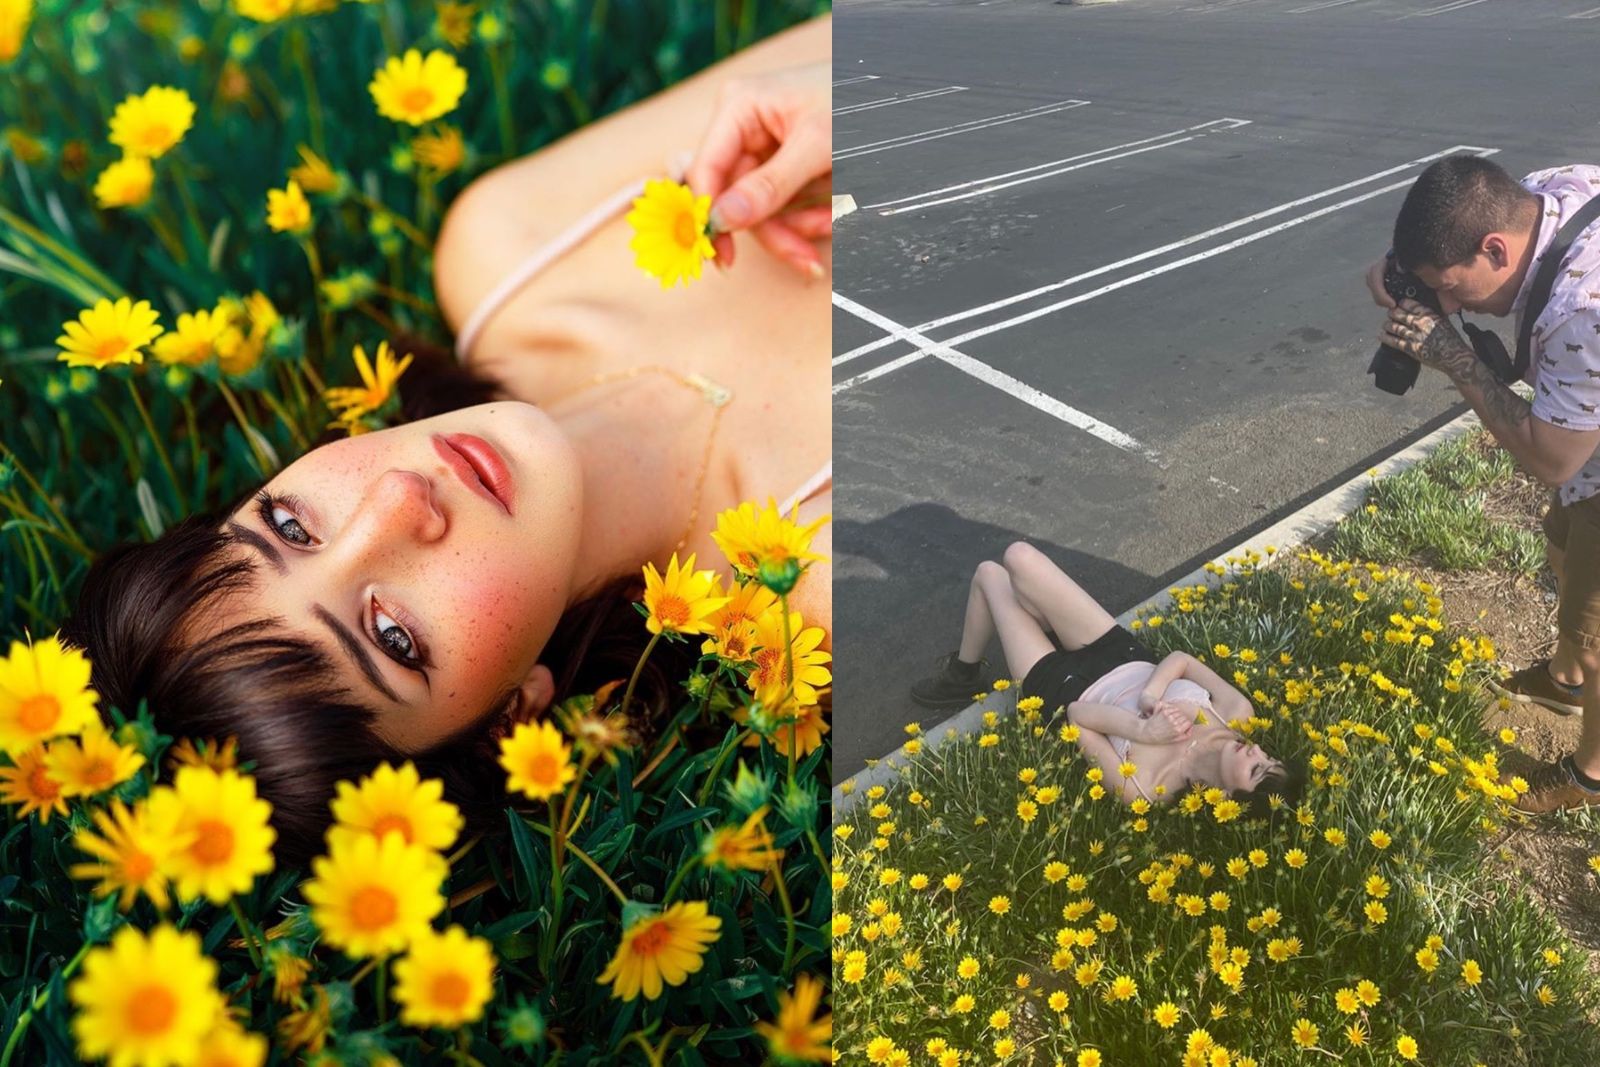 These Hilarious Images Show How Instagrammers Make Their Own Reality image 1